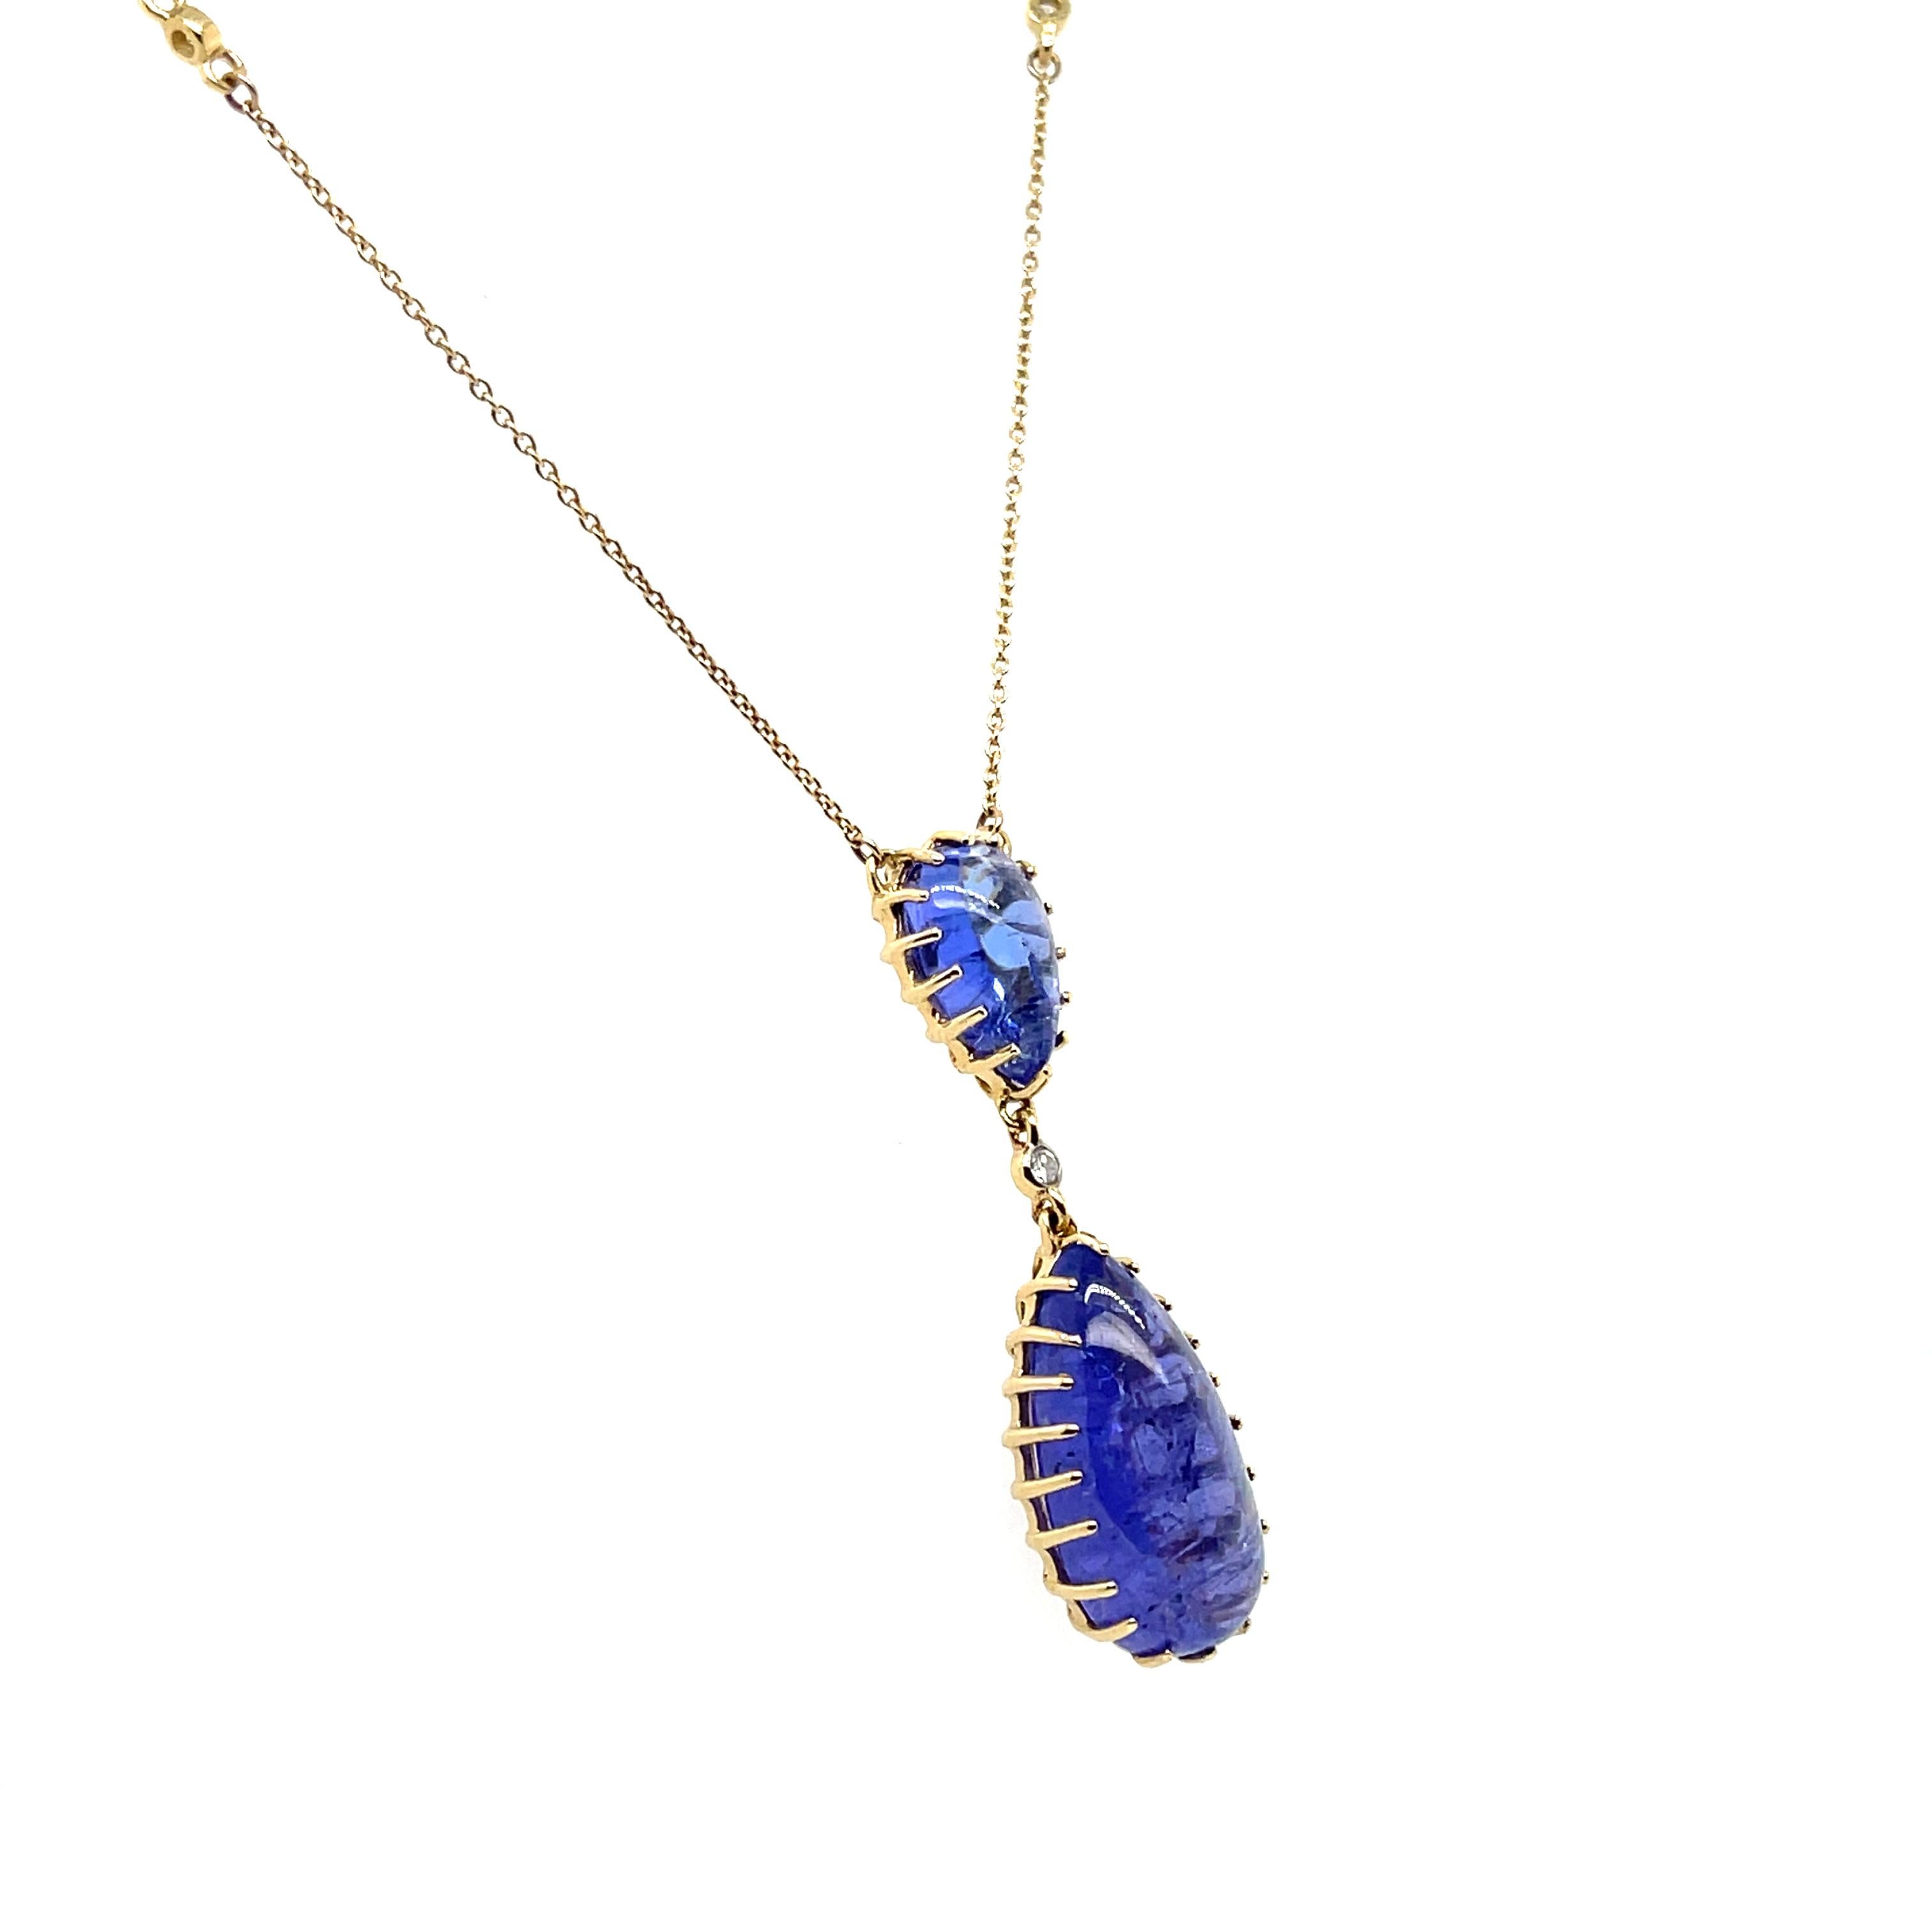 Beautifully designed 14CT YG double drop pear shaped Tanzanite pendant/necklace with an elegant touch set of round brilliant cut diamonds, polish finished with parrot clasp. 

Tanzanite Cabochons Weight: 12.55ct 
Dimensions: 10.7mm(L) x 6.8mm (W) x